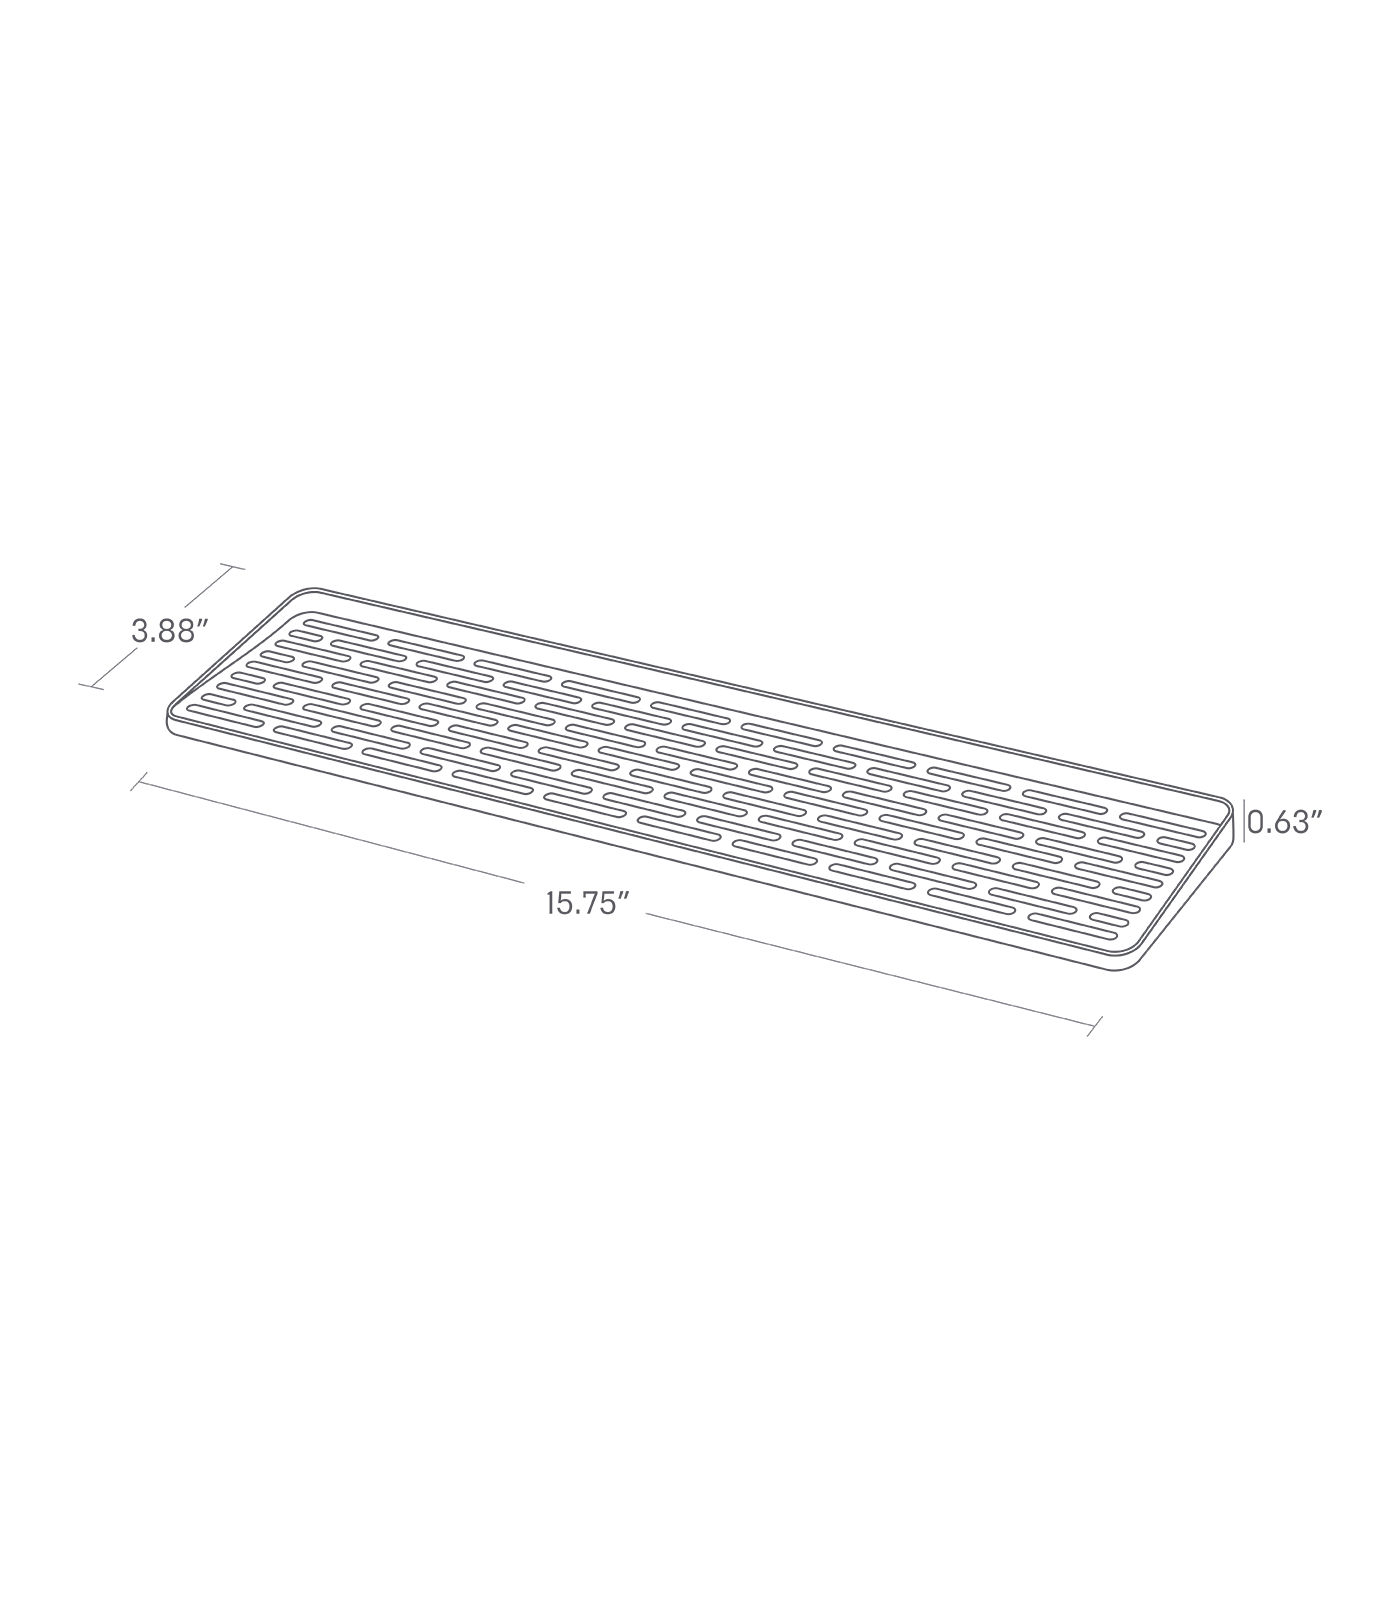 Dimension image for Sink Drainer Tray on a white background including dimensions  L 4.13 x W 15.75 x H 0.79 inches